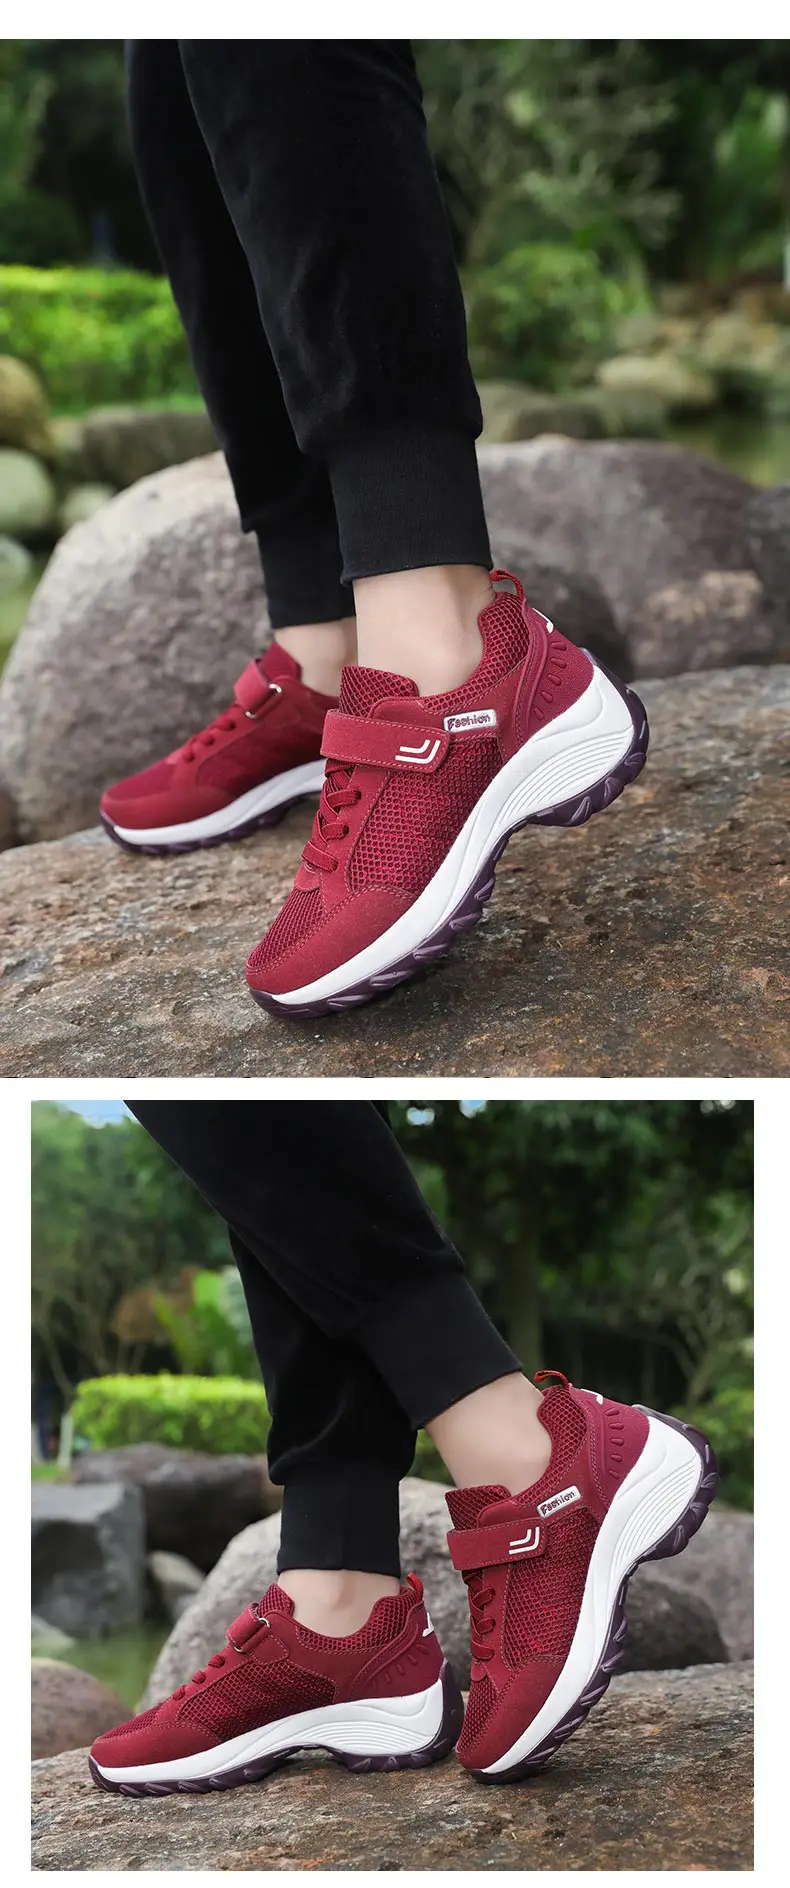 Golden Sapling Plus Size Sneakers Women Breathable Air Mesh Trainer Running Shoes Fitness GYM Lightweight Women's Sports Sneaker